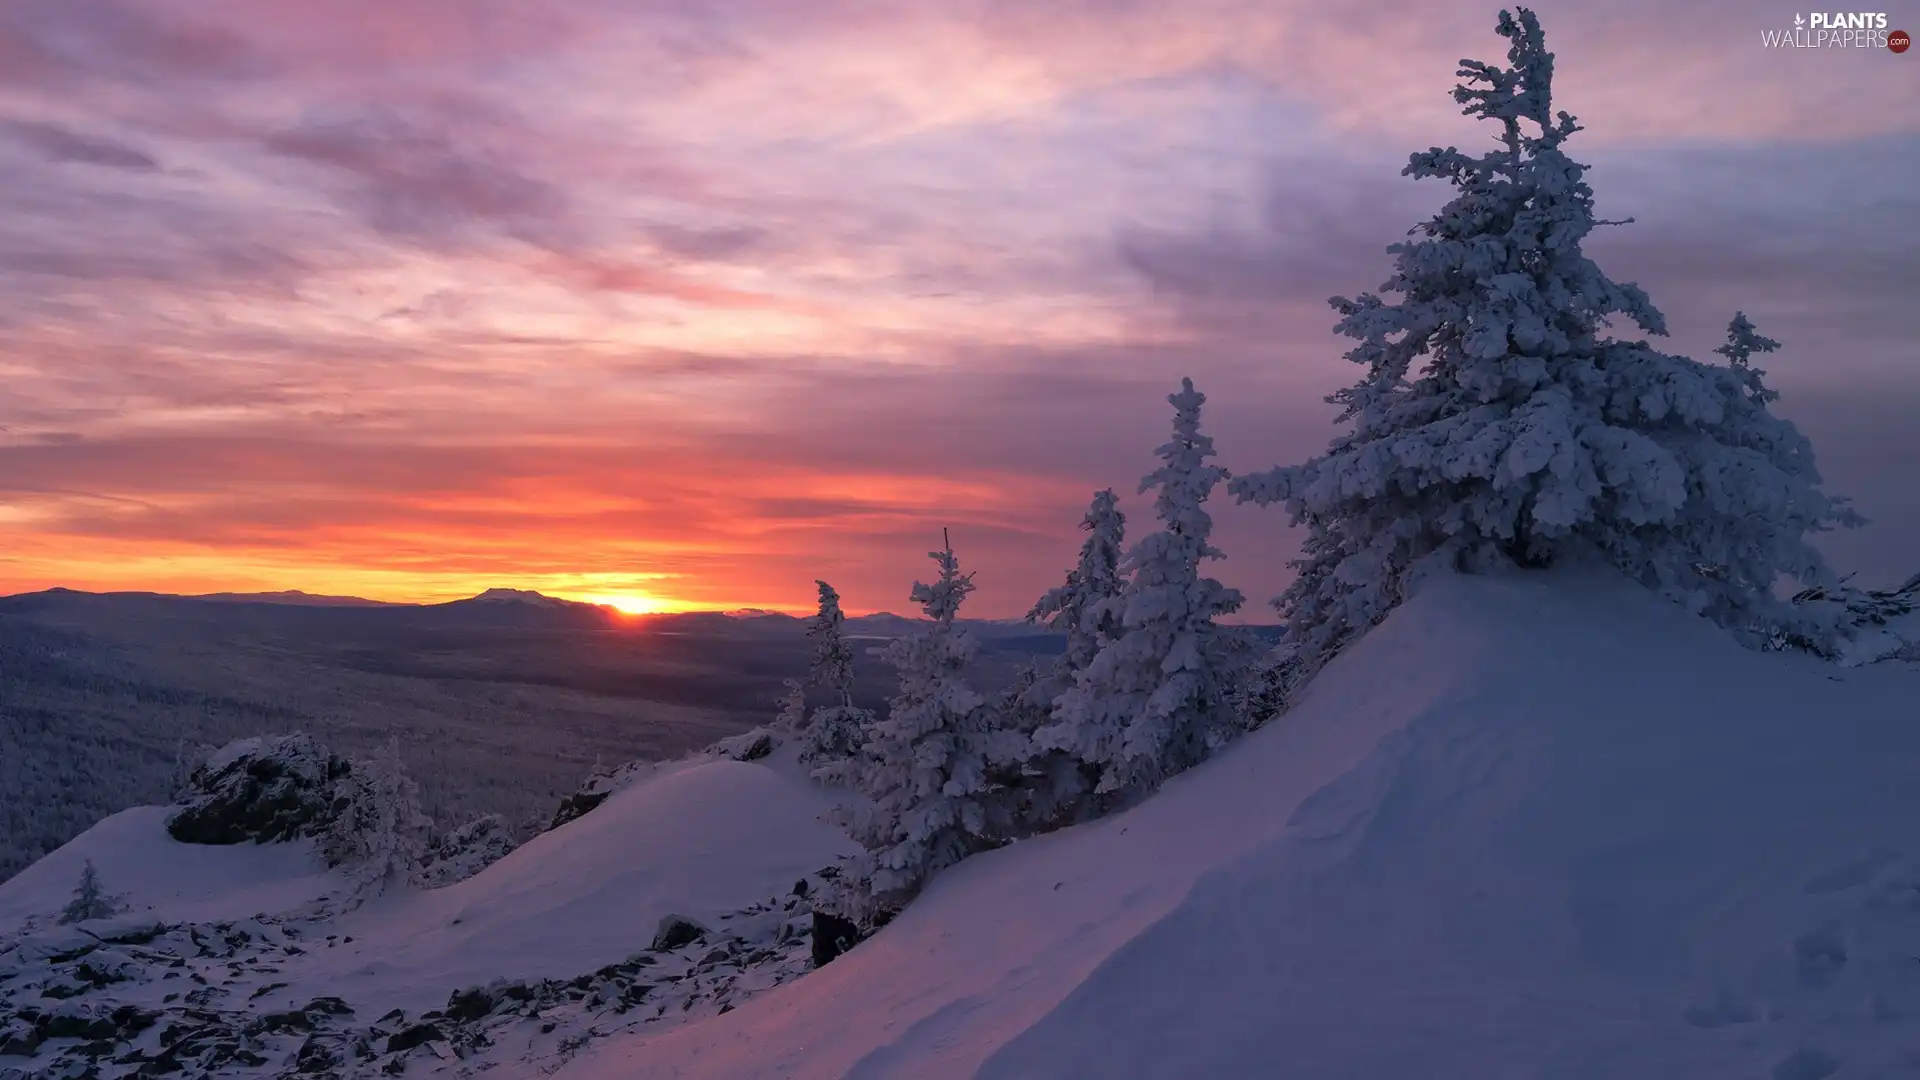 viewes, Mountains, Great Sunsets, winter, Spruces, trees